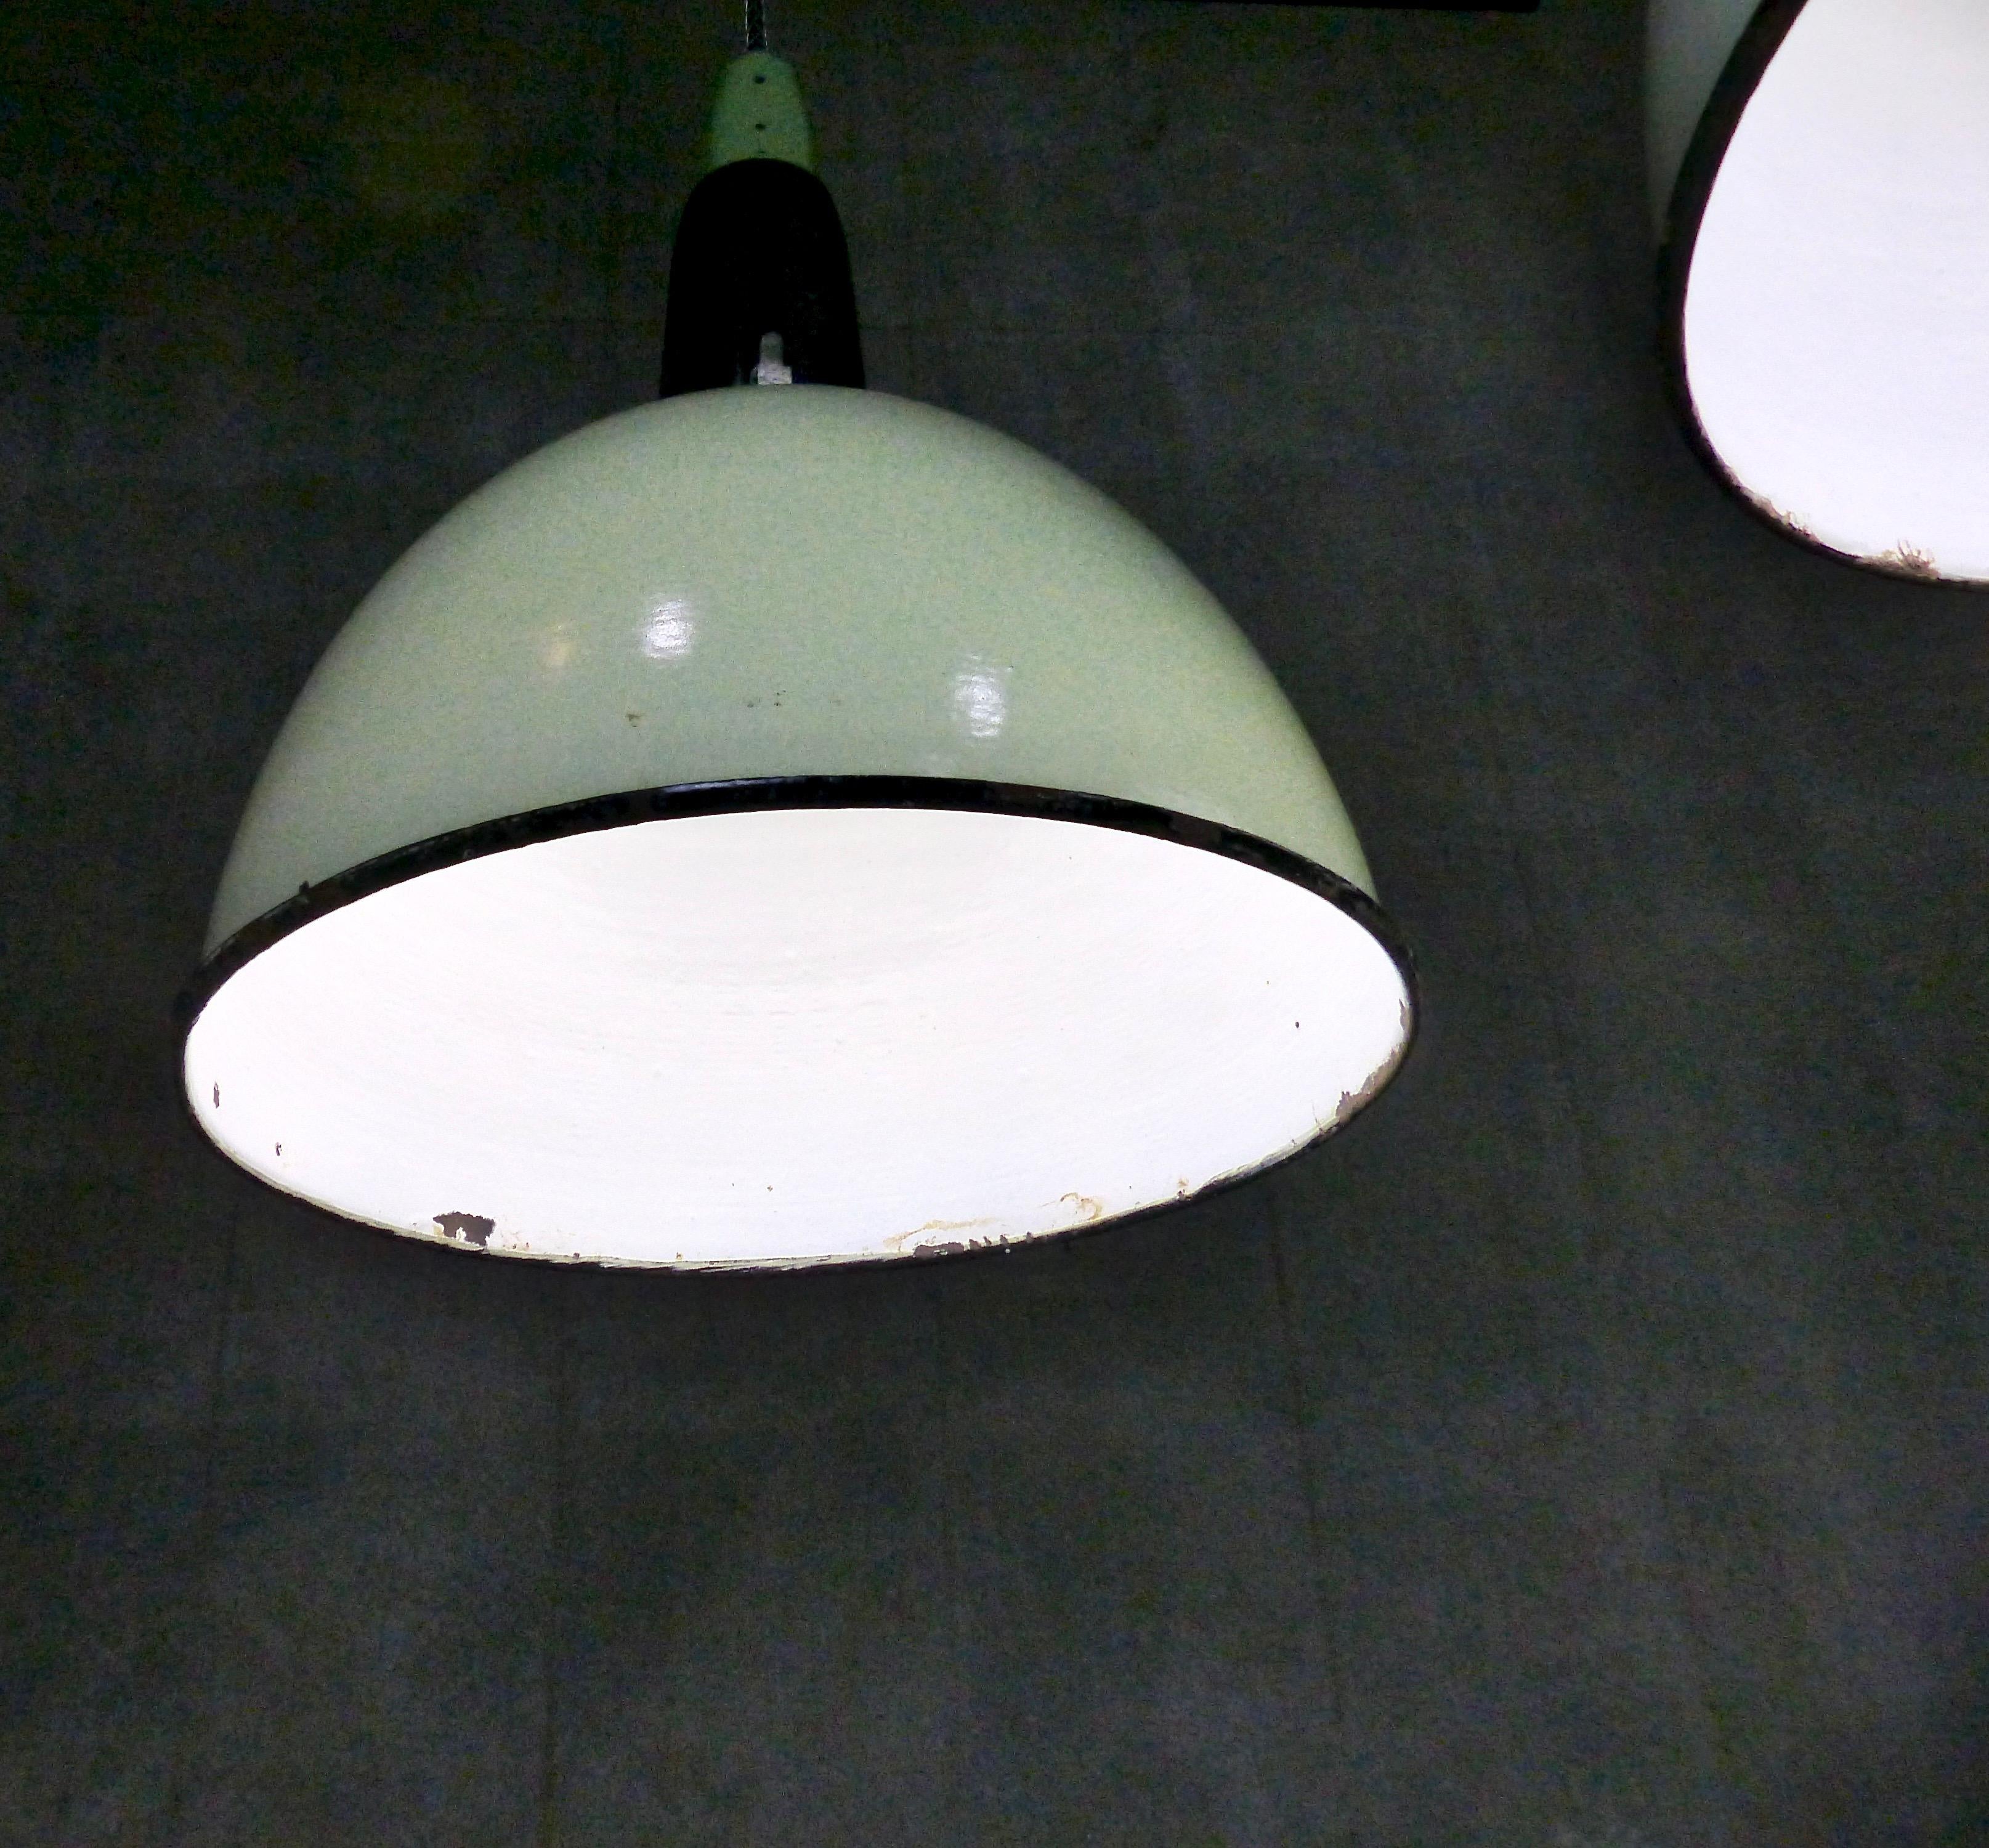 Very cool and unusual vintage industrial pendant lights from Europe. Original circa 1930s pale green enamel-over-metal shades with black-and-green caps. We currently have 12 in stock. Re-wired and inspected and approved to current electrical